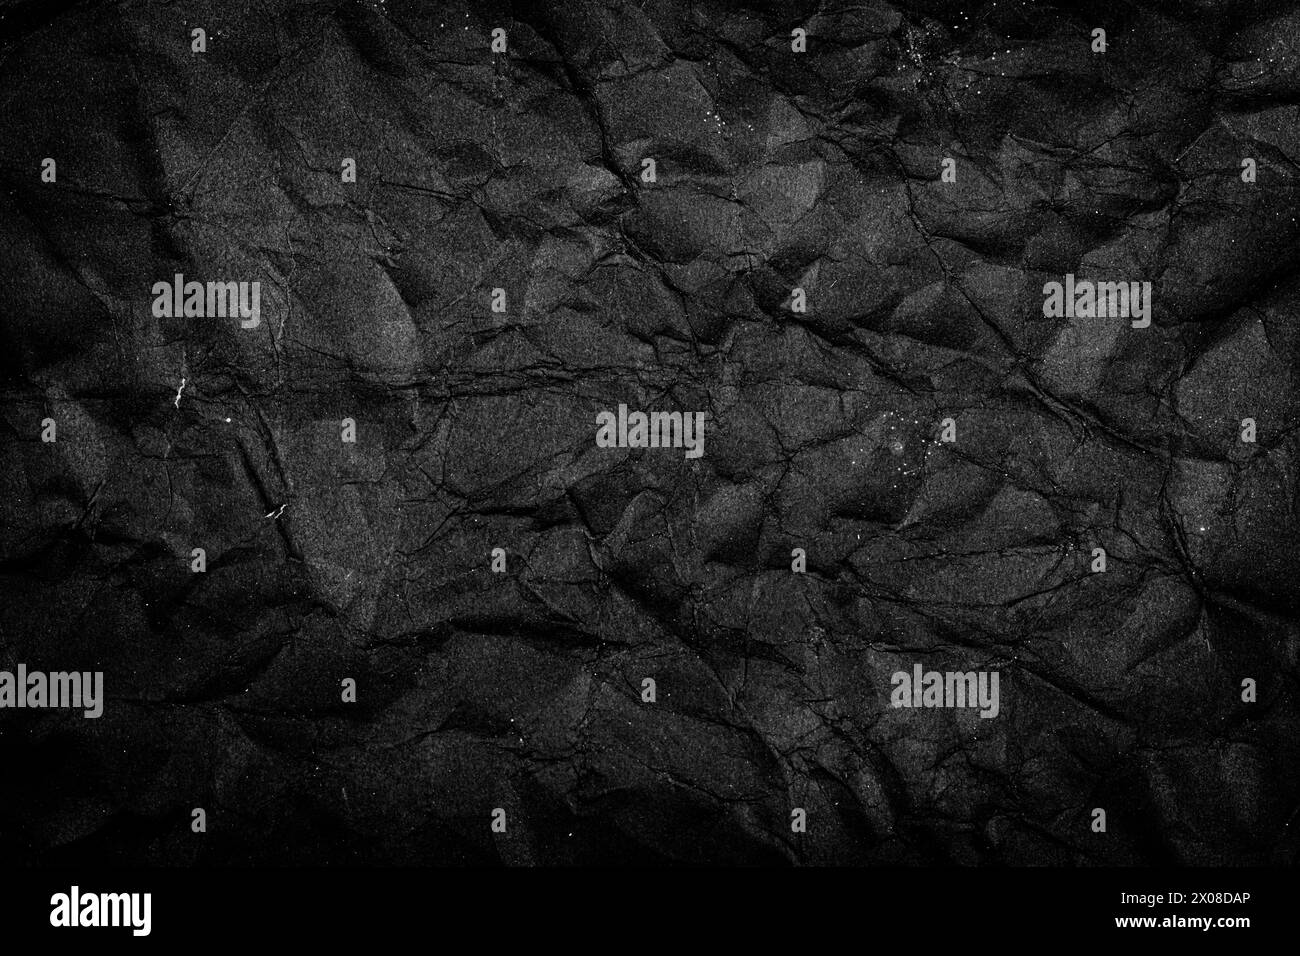 Black Paper Texture background. Crumpled Black paper abstract shape background. Stock Photo